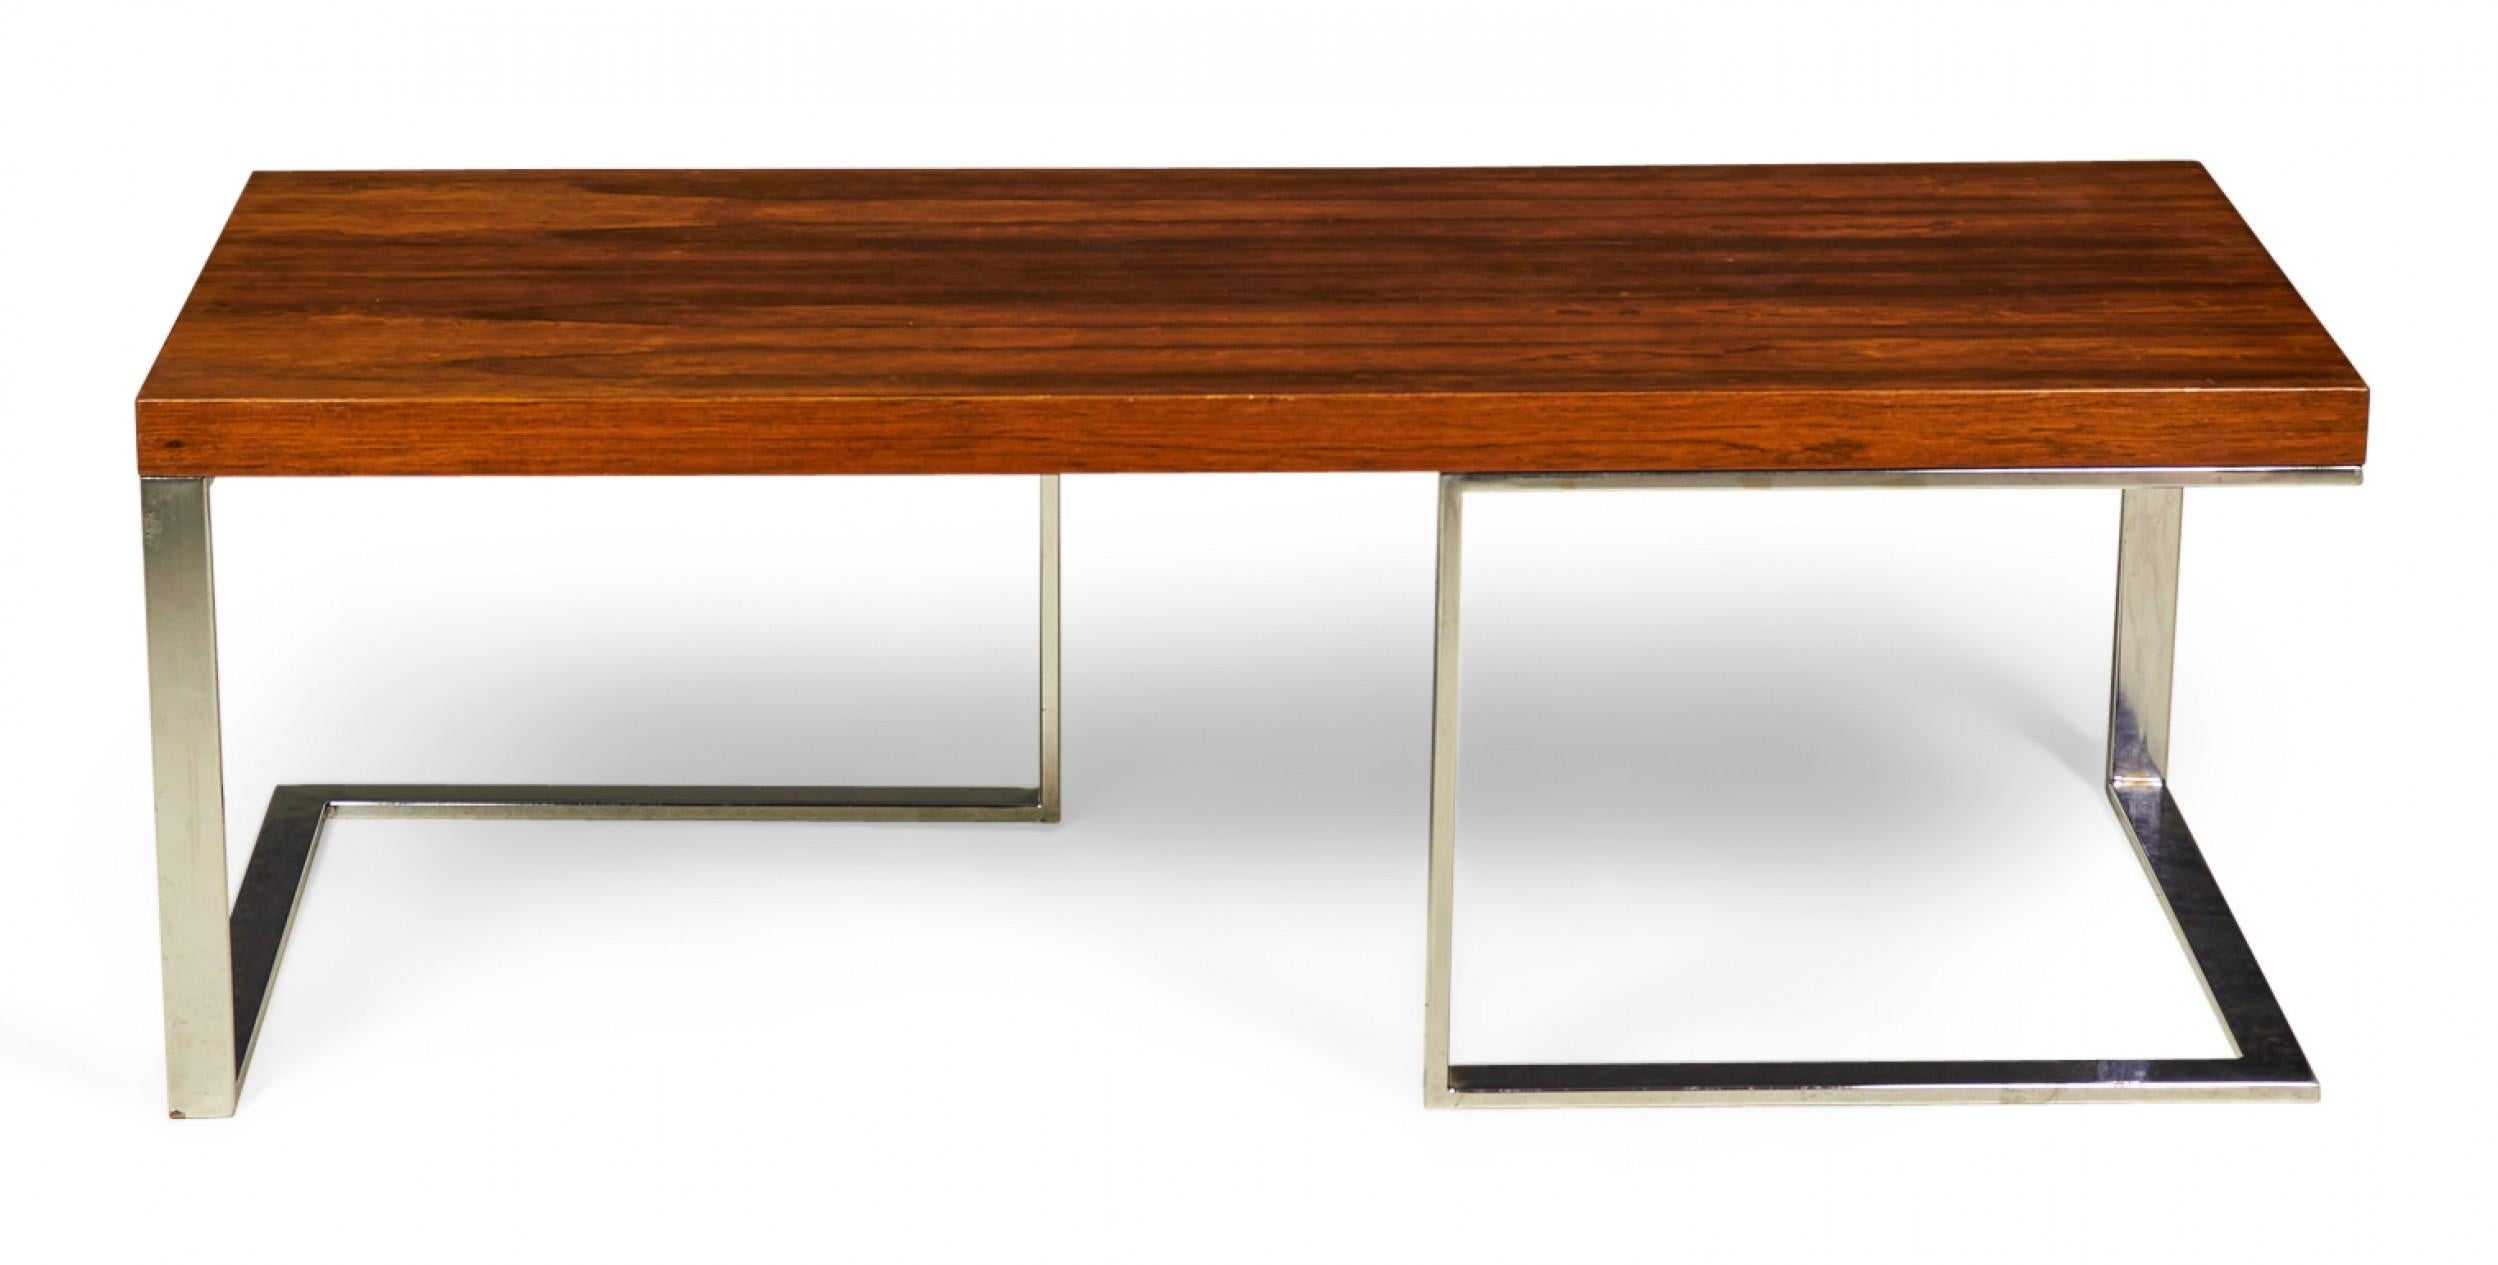 Milo Baughman for Thayer Coggin Rosewood 'Minimalist' Cocktail / Coffee Table In Good Condition For Sale In New York, NY